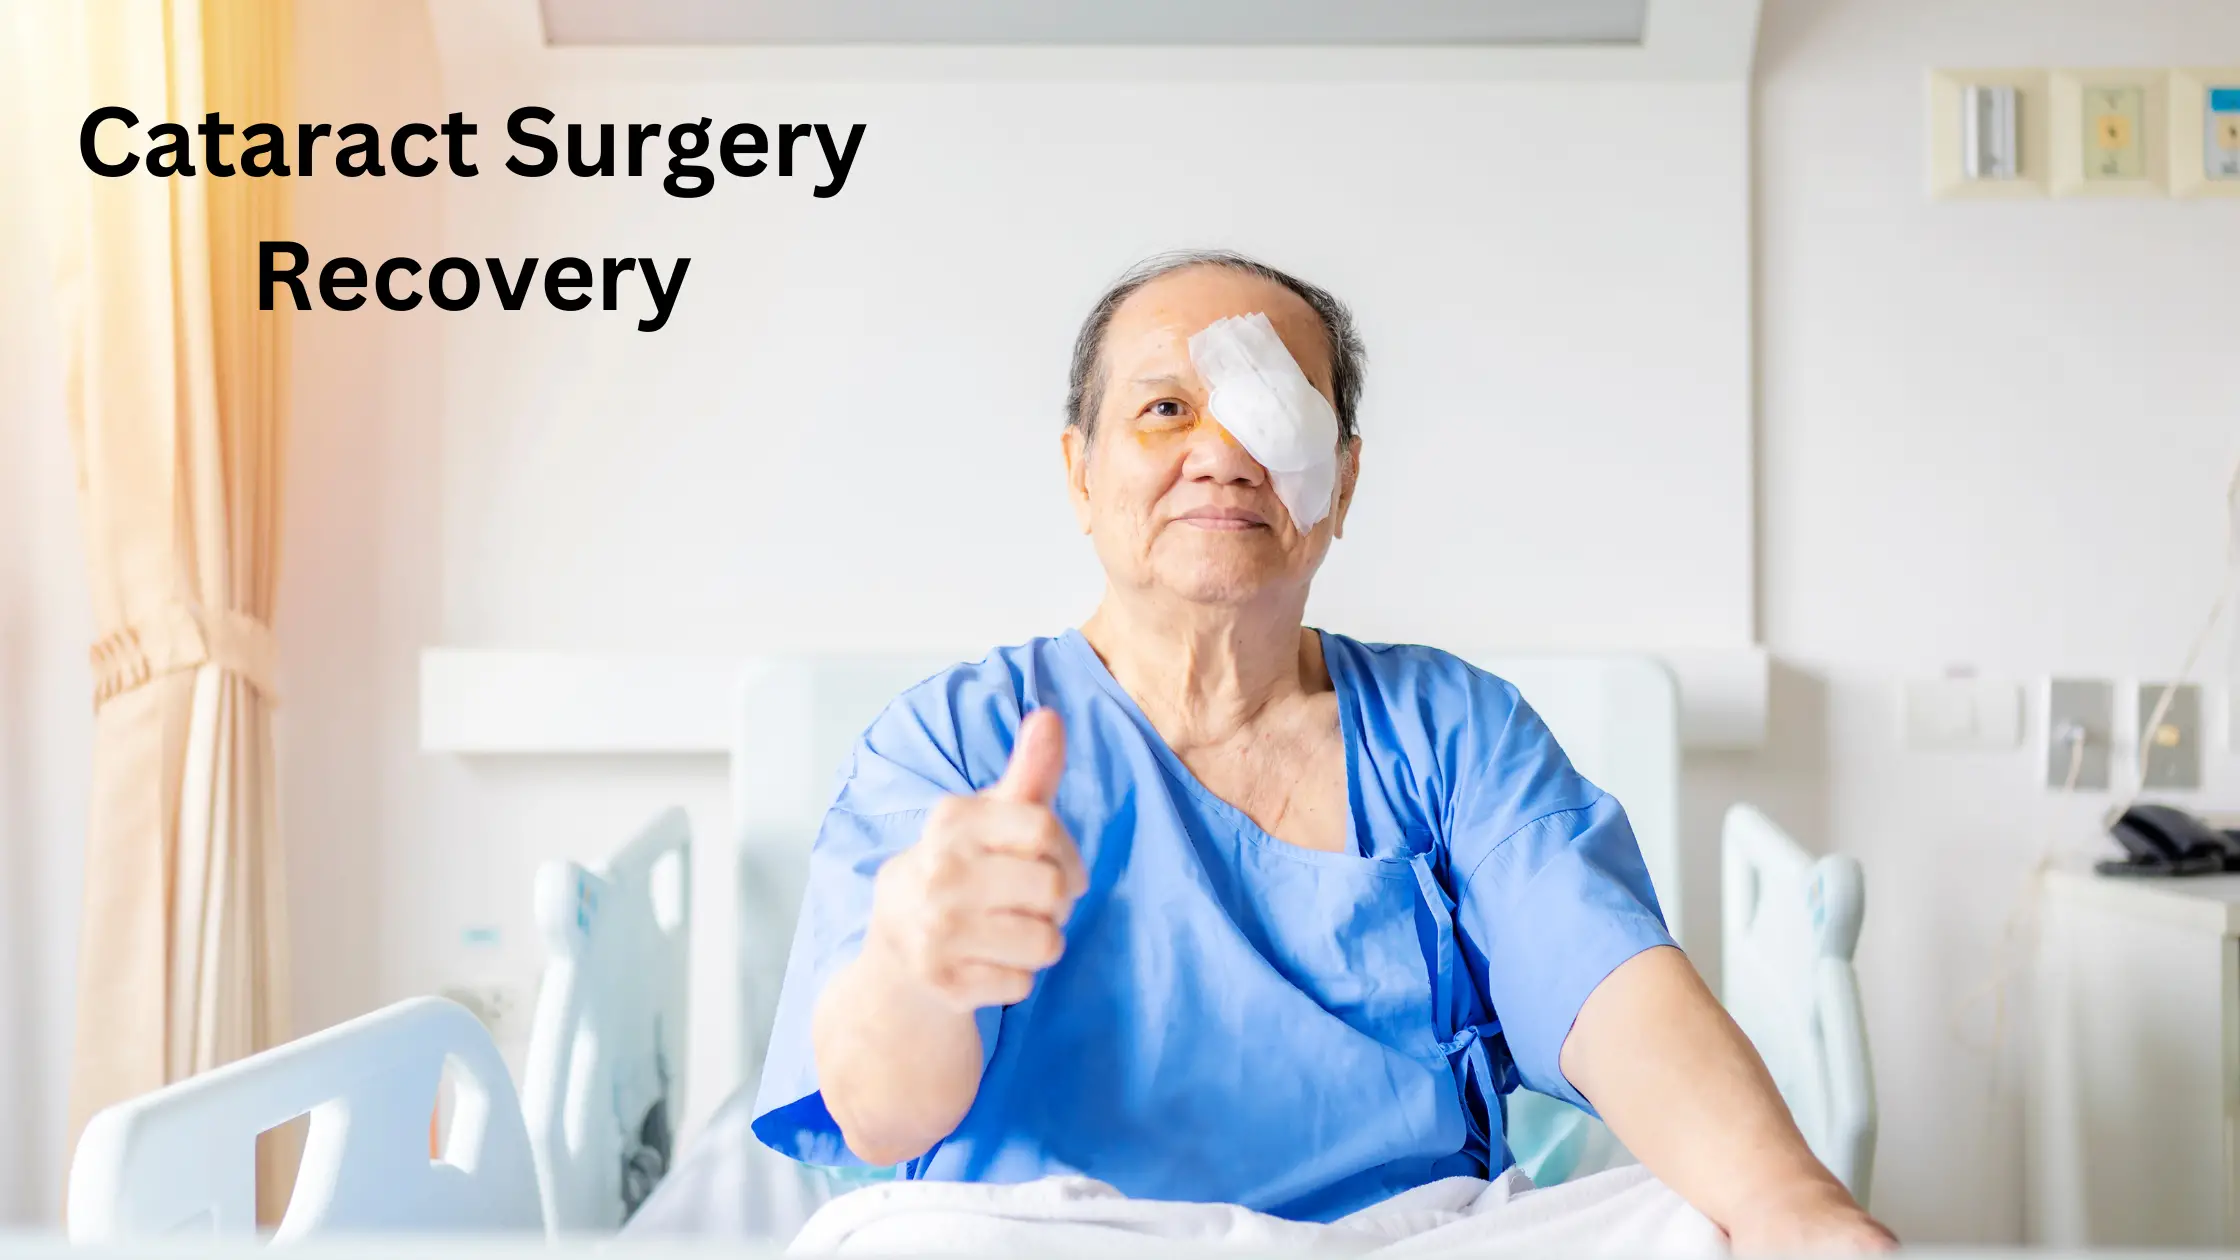 Post-surgery care and recovery for cataract patients